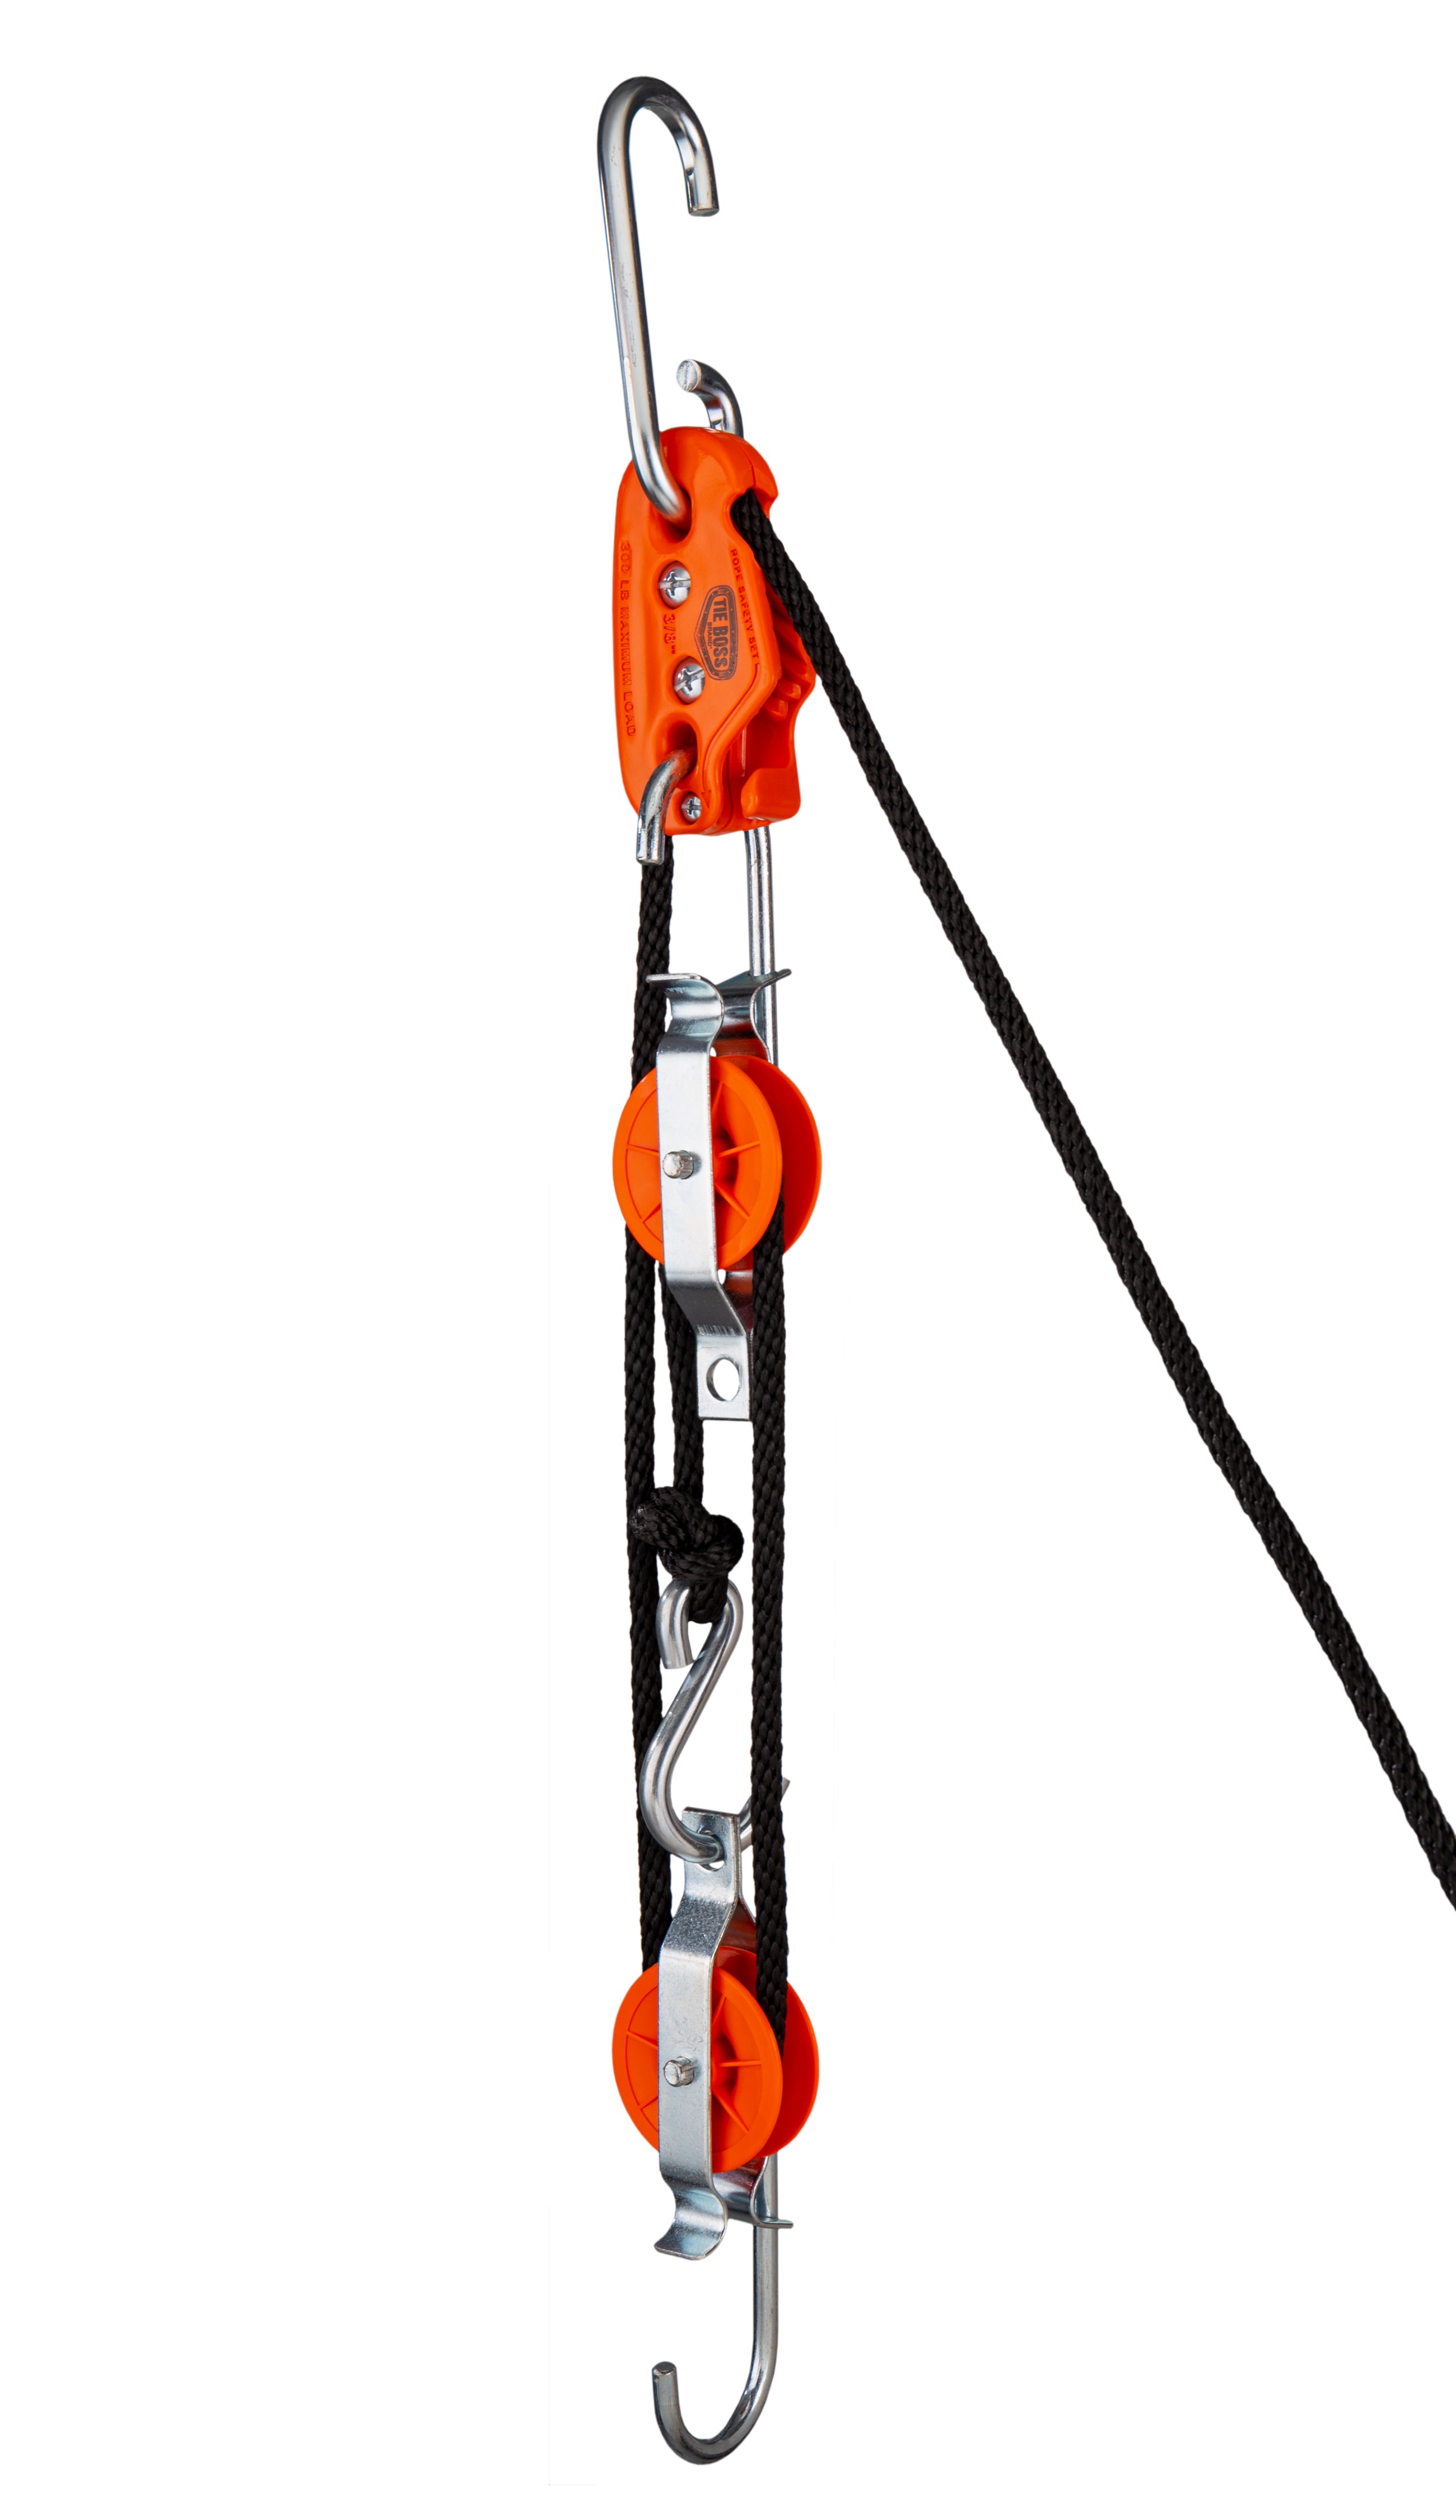 Tie Boss - Self Locking Block and Tackle Pulley Hoist System with 35